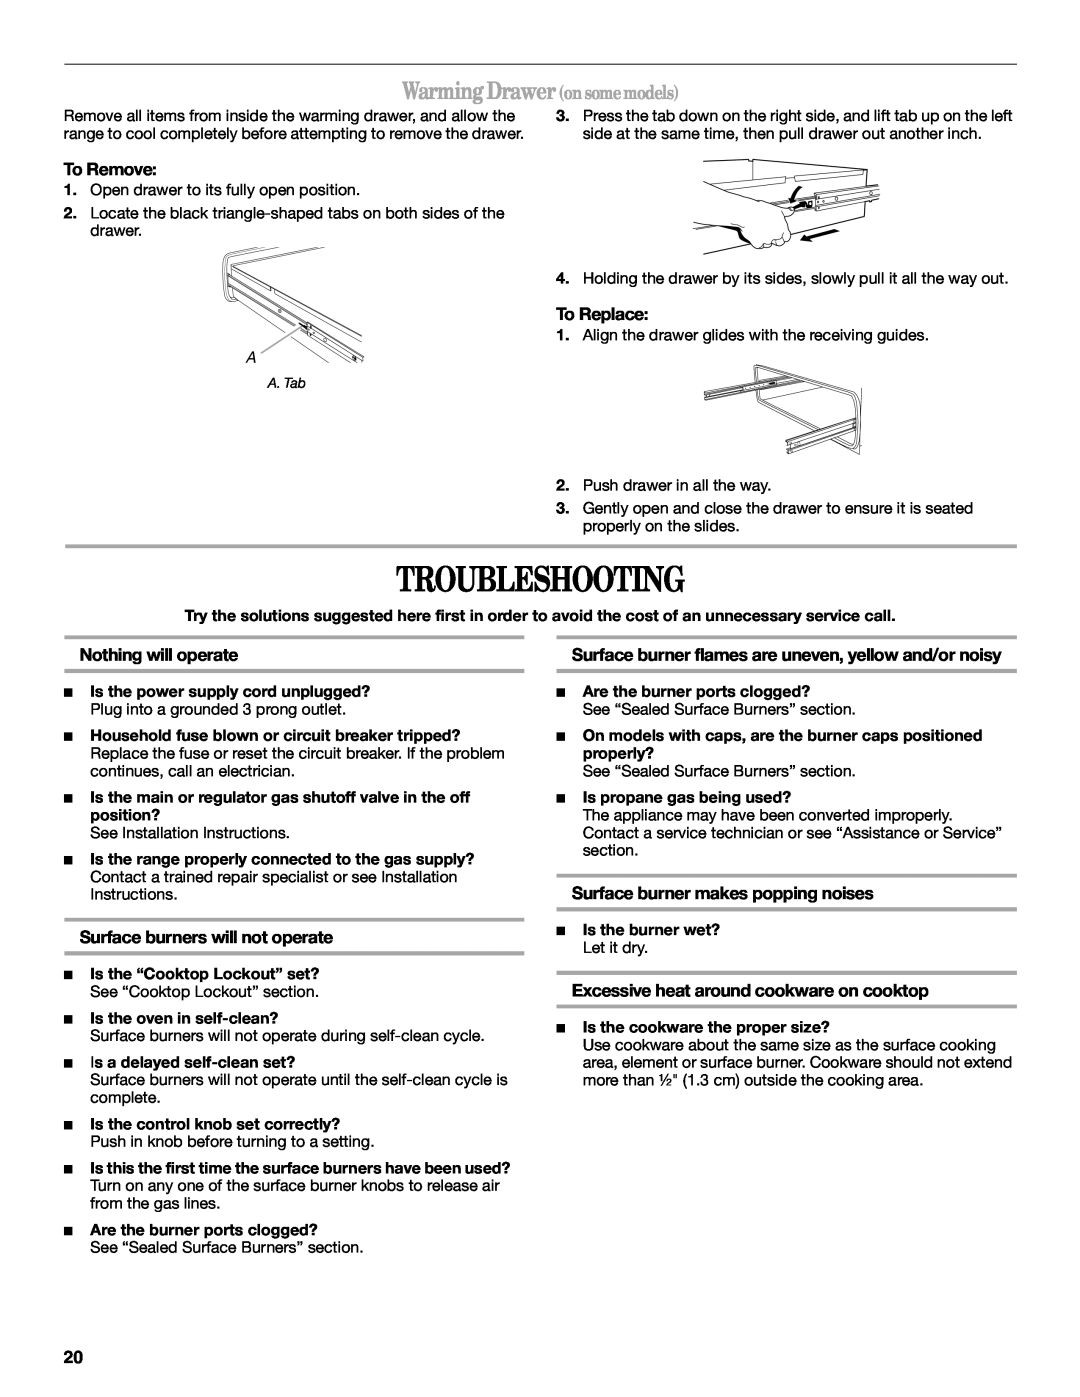 Whirlpool W10110369 manual Troubleshooting, Warming Drawer on some models, To Remove, To Replace, Nothing will operate 